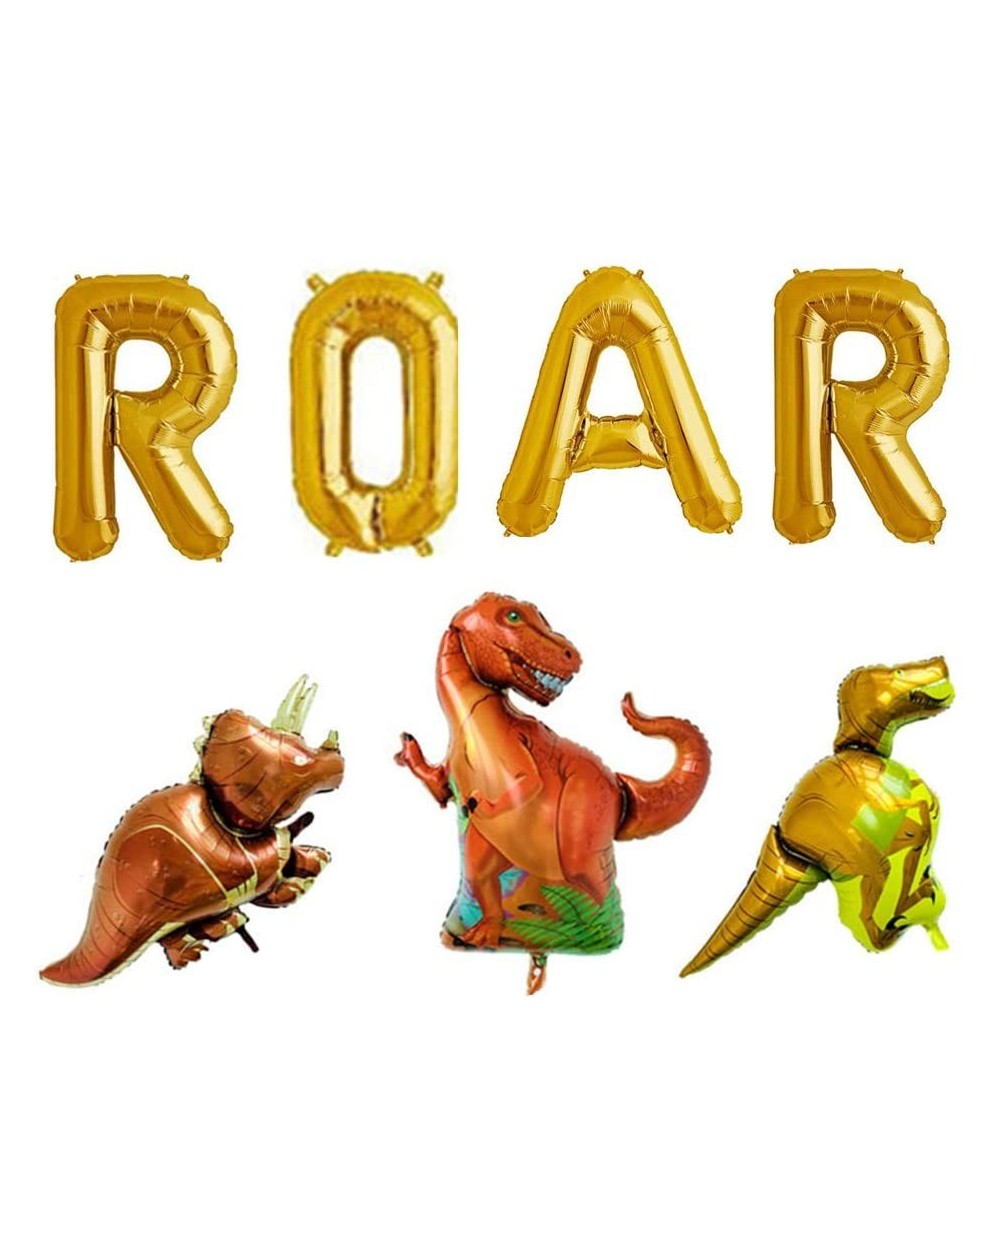 Balloons 16" Roar Gold Letter Balloons with 3 Dinosaur Balloons for Dinosaur Birthday Theme - C418HY7LM2Y $9.41